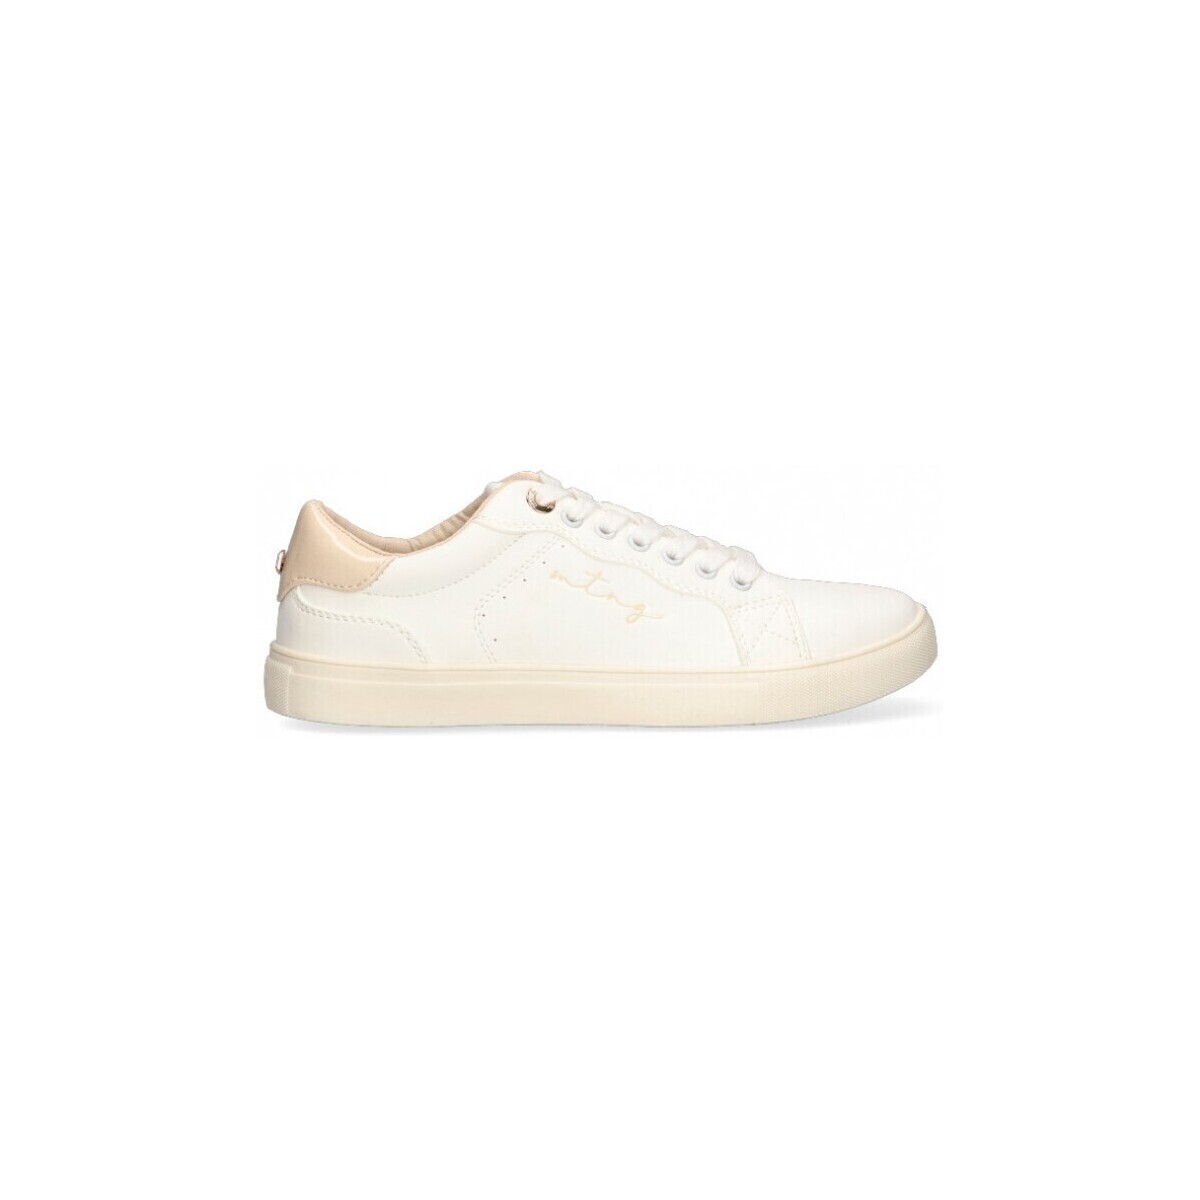 Scarpe Donna Sneakers MTNG 73466 Bianco